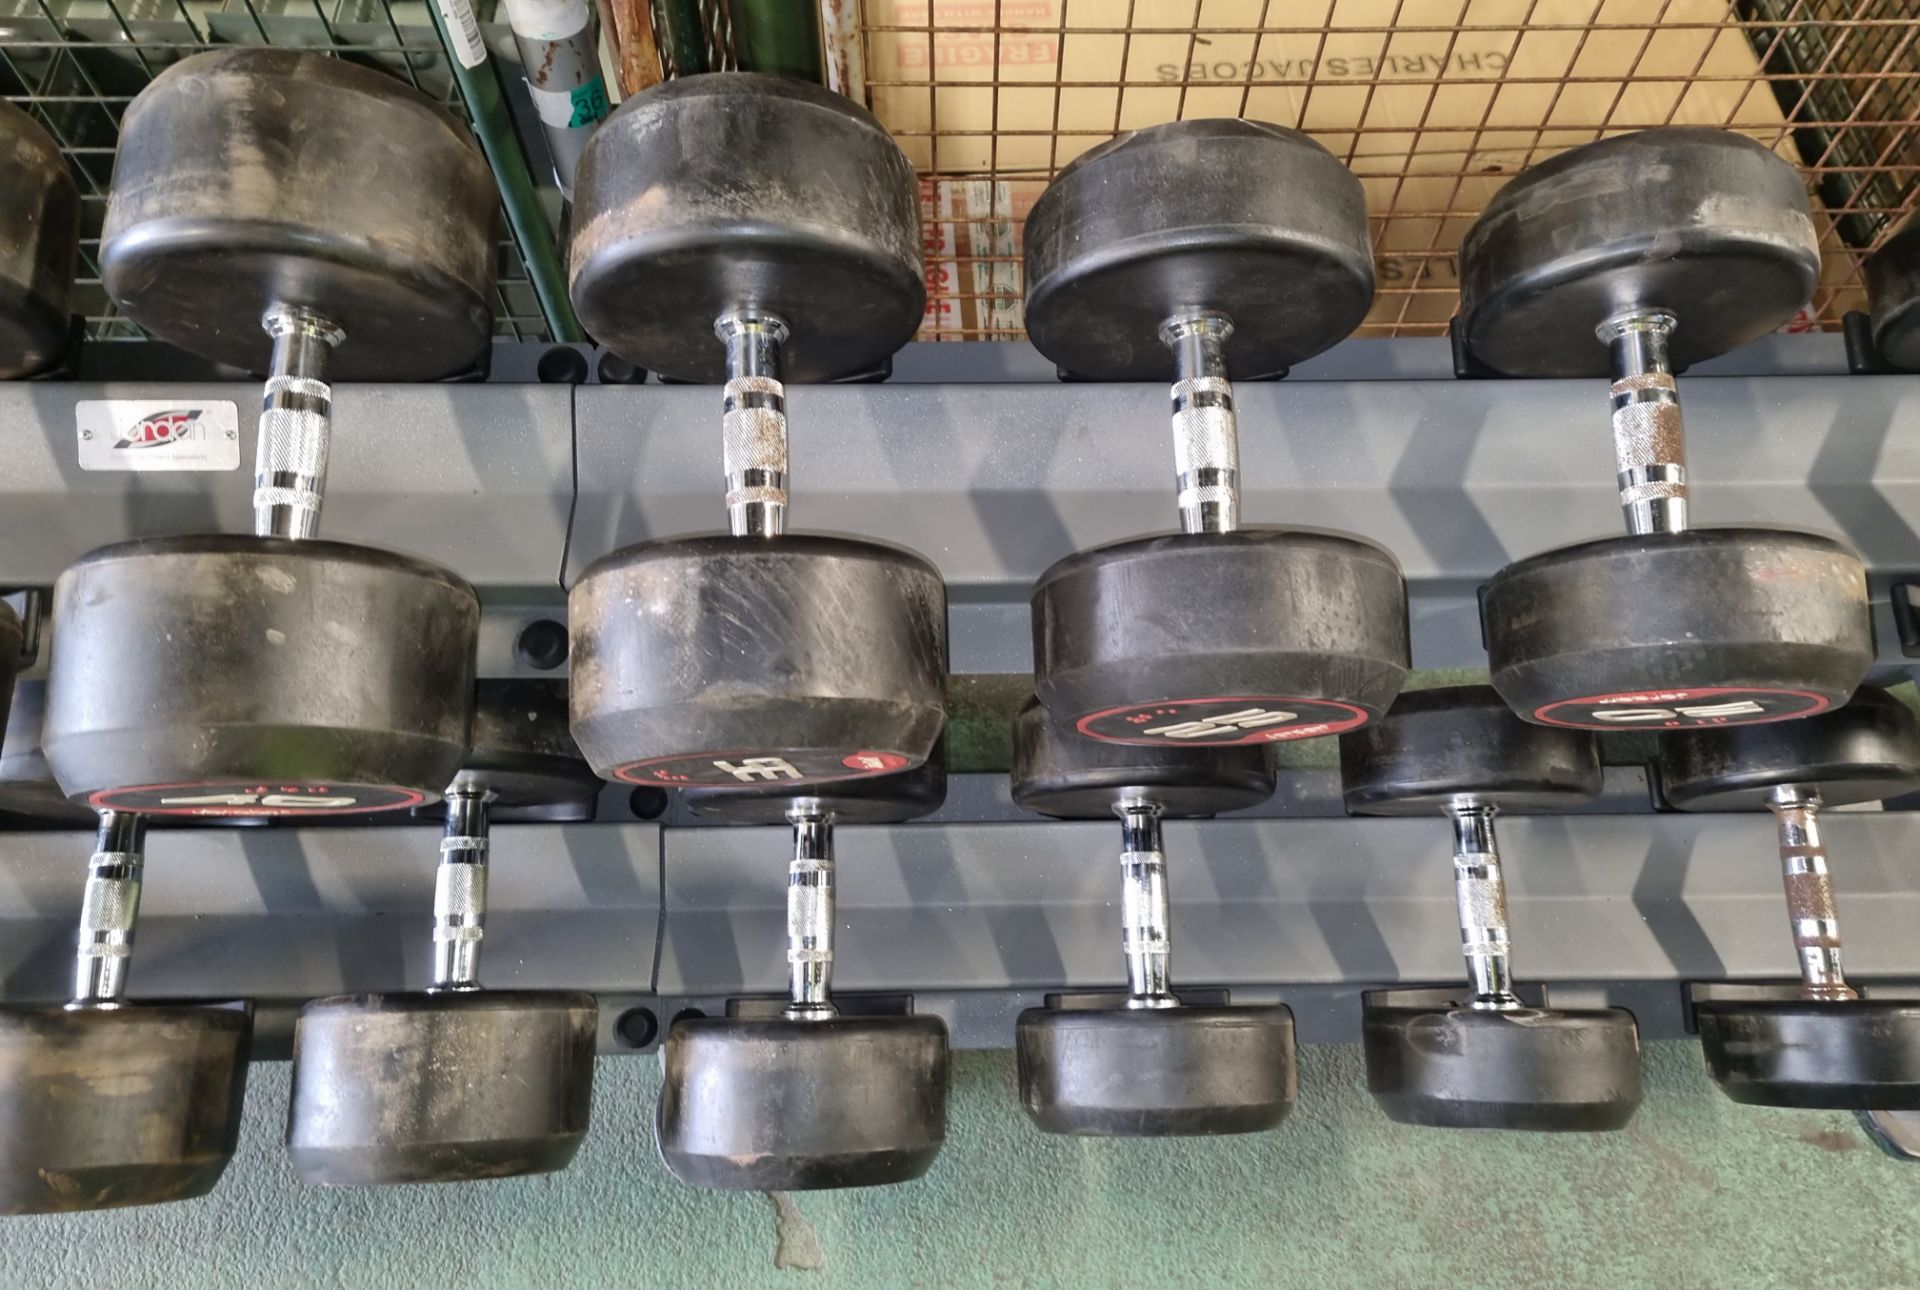 Jordan dumbell weight rack with weights 2.5kg to 50kg - see pictures - Image 7 of 12